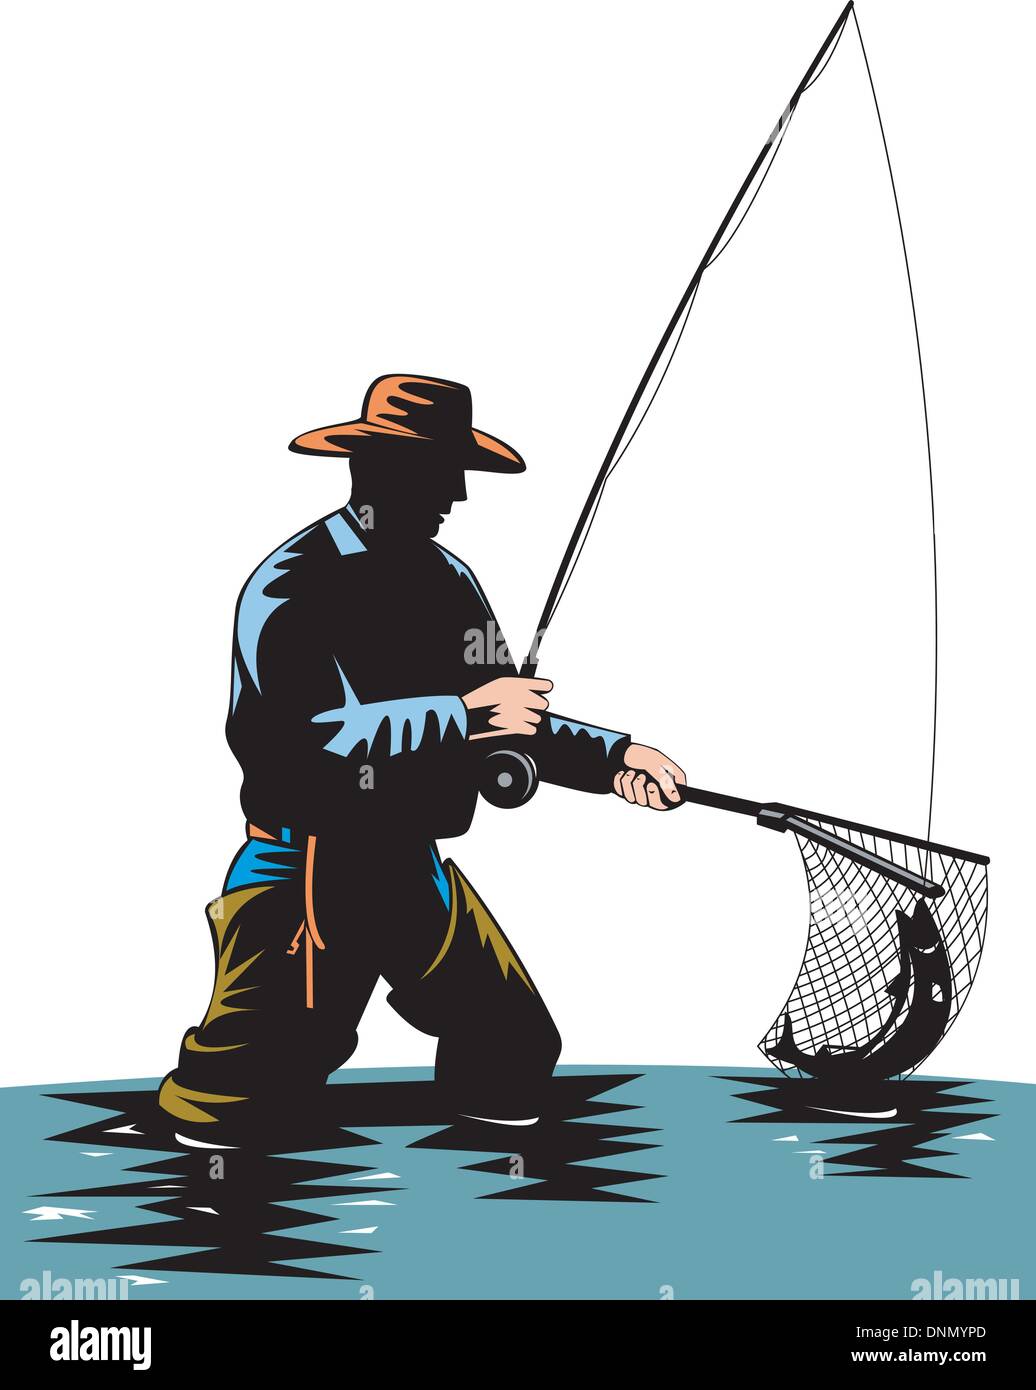 https://c8.alamy.com/comp/DNMYPD/illustration-of-a-fly-fisherman-casting-rod-and-reel-done-in-retro-DNMYPD.jpg